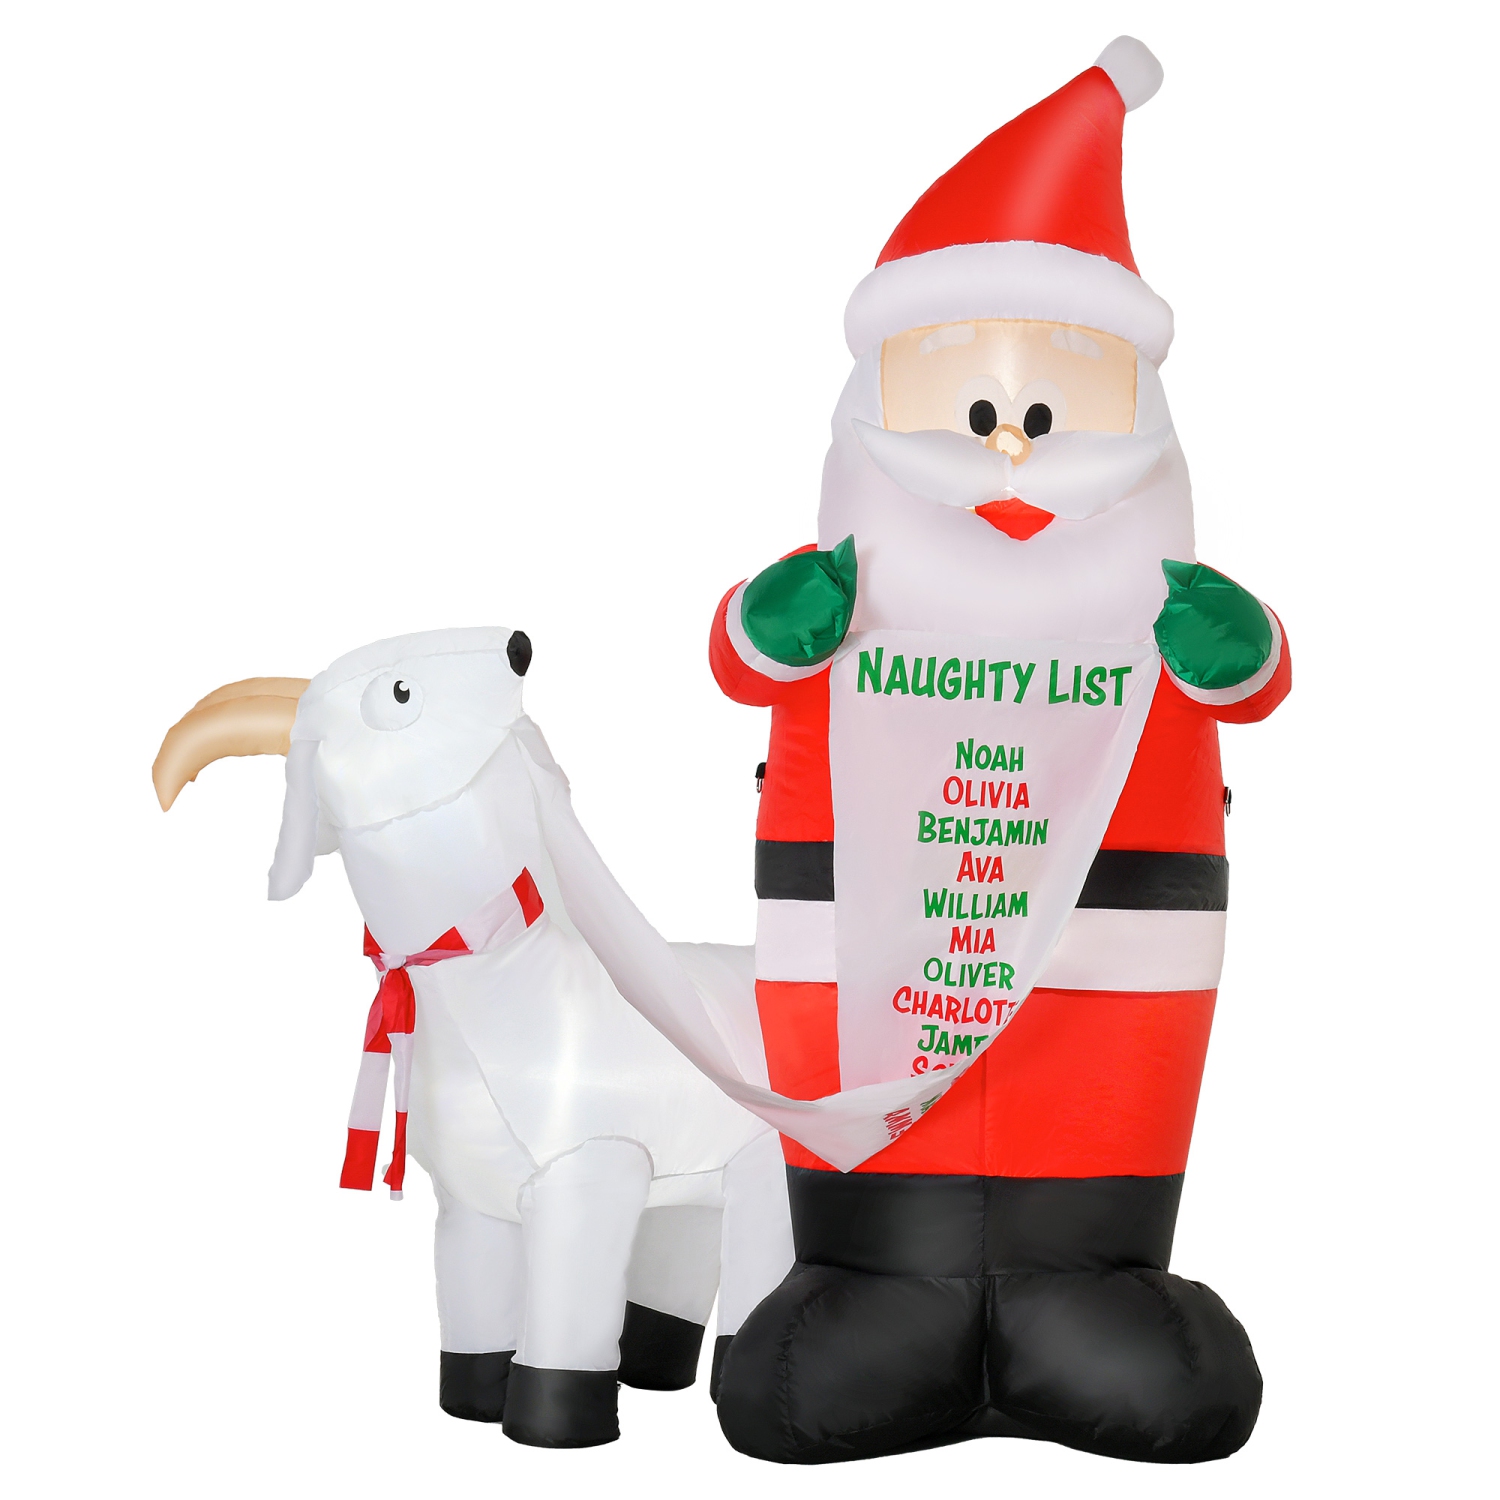 HOMCOM 6ft Christmas Outdoor Inflatables Santa Claus with Goat Blow Up Yard Decoration with Built-in LED Lights for Holiday Party Xmas Garden